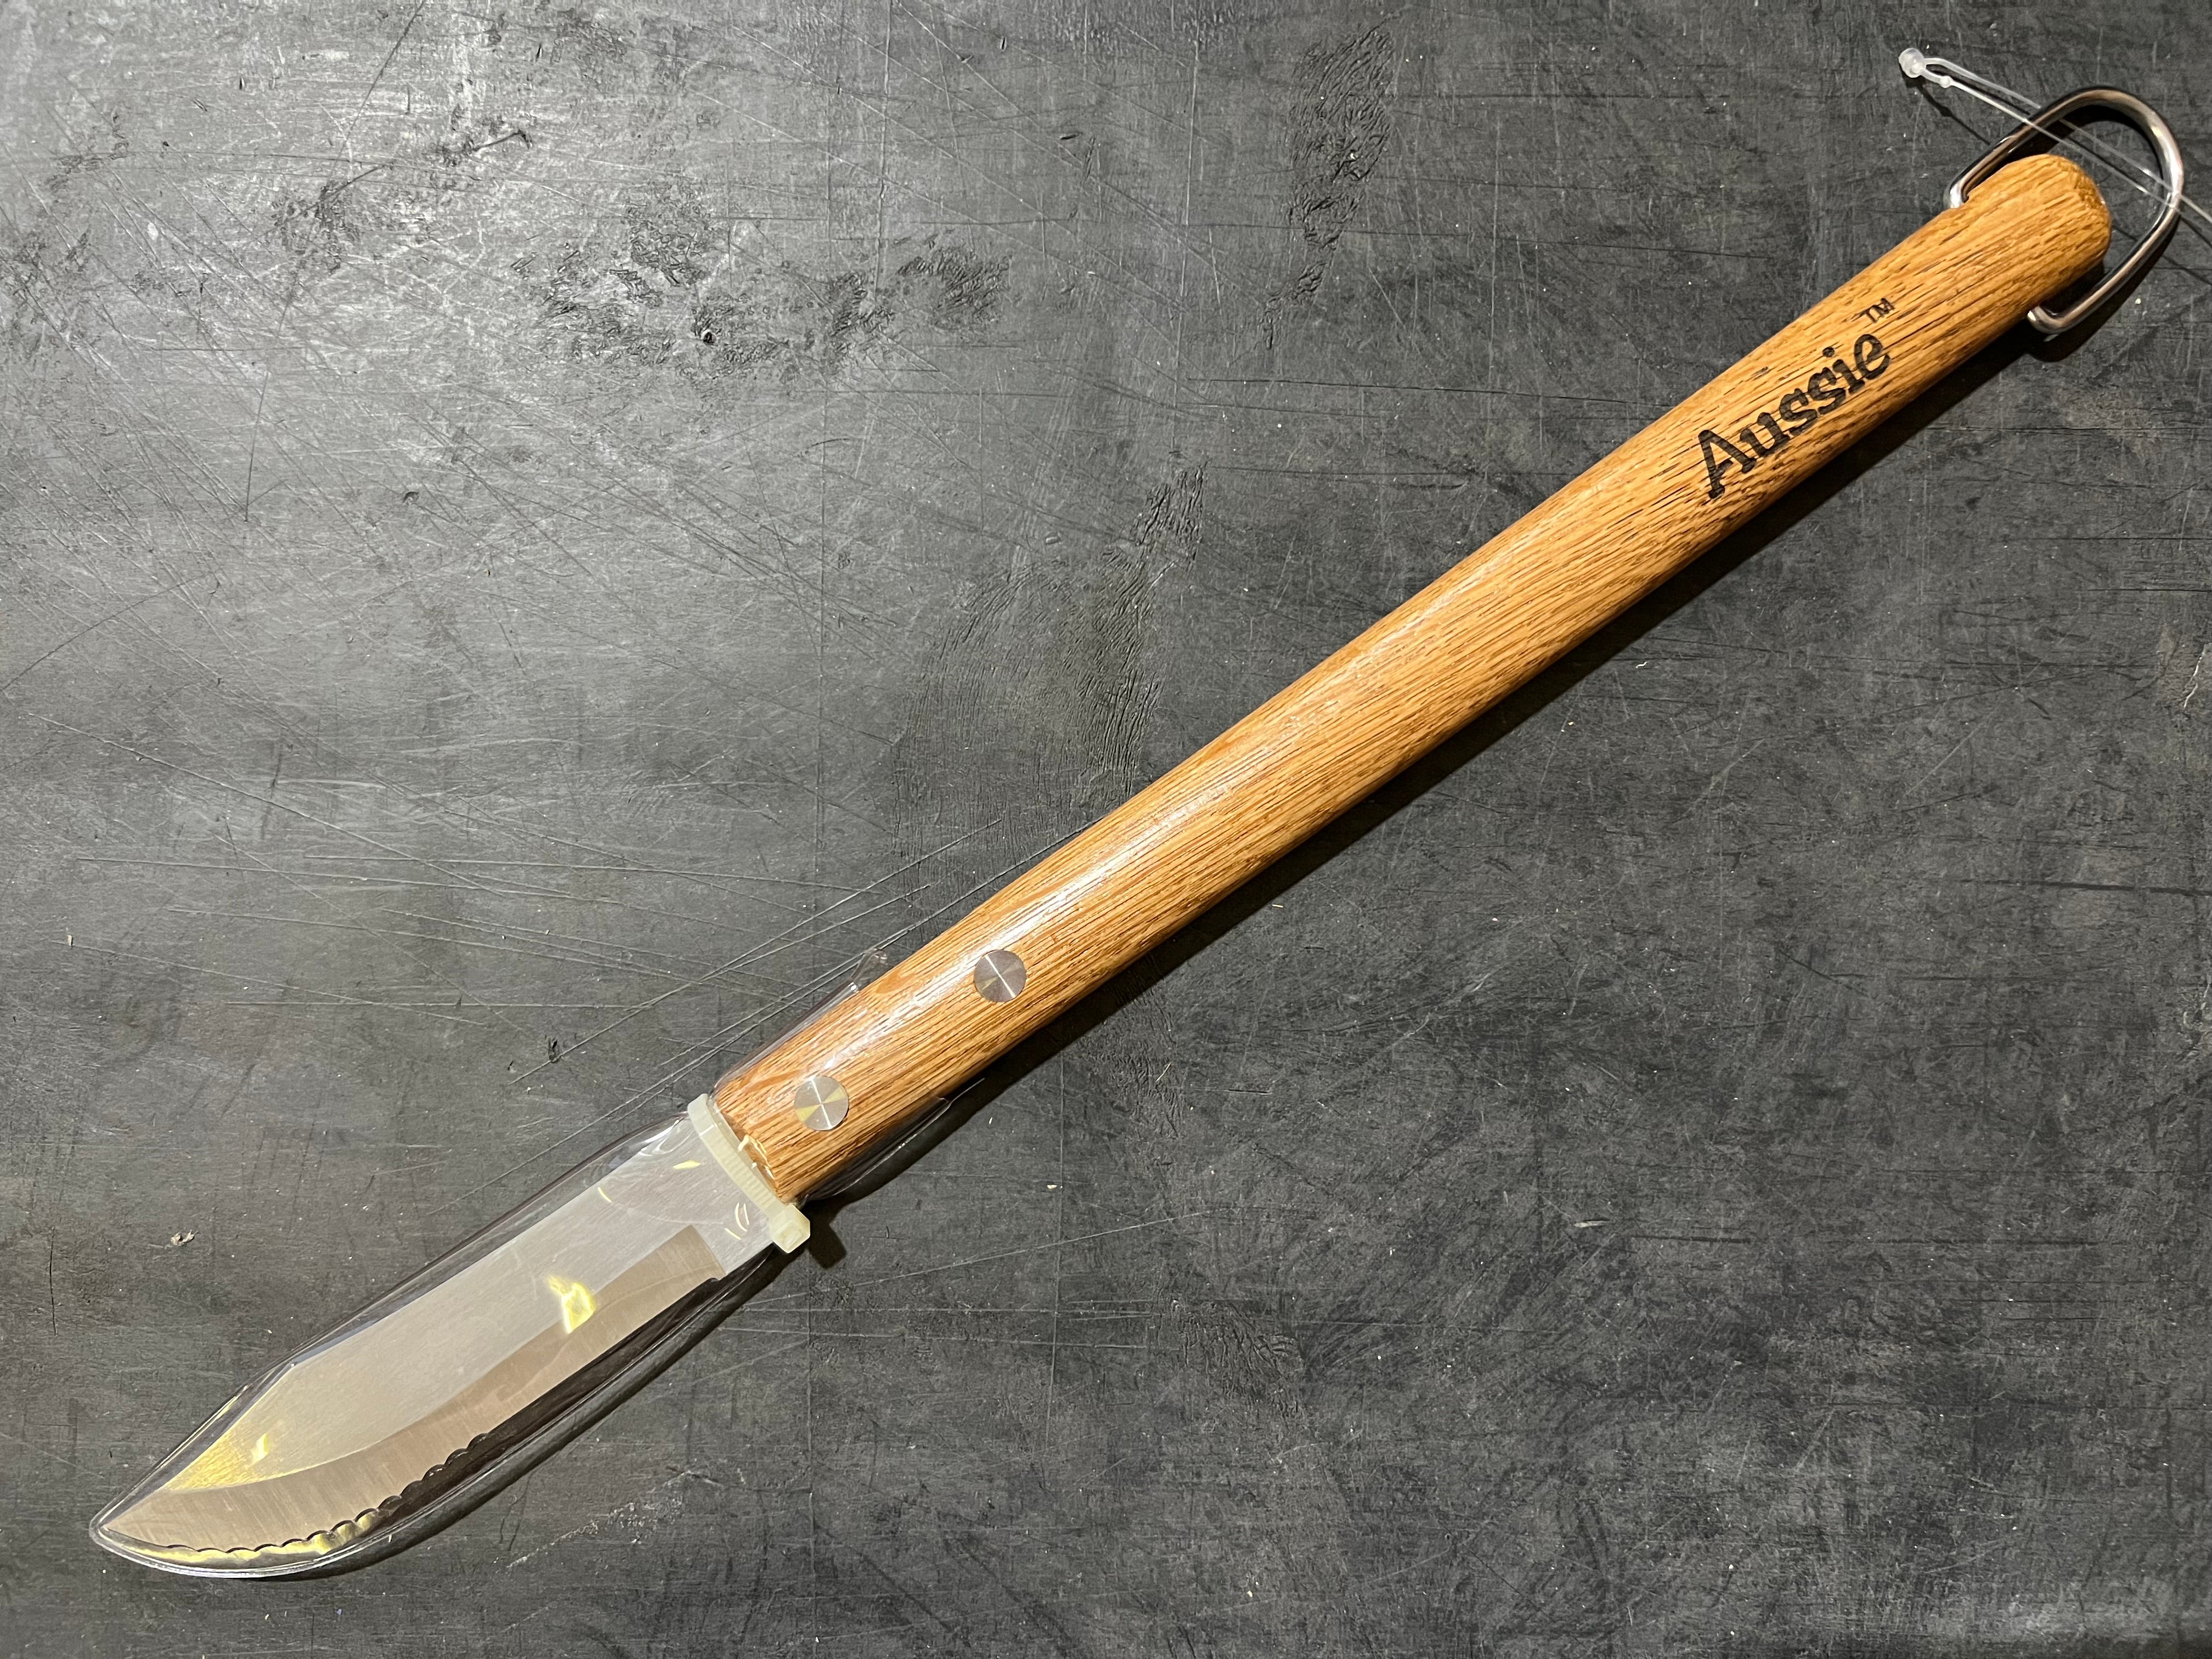 Aussie 009-06-0162 18" Stainless Steel Knife with Wood Handle